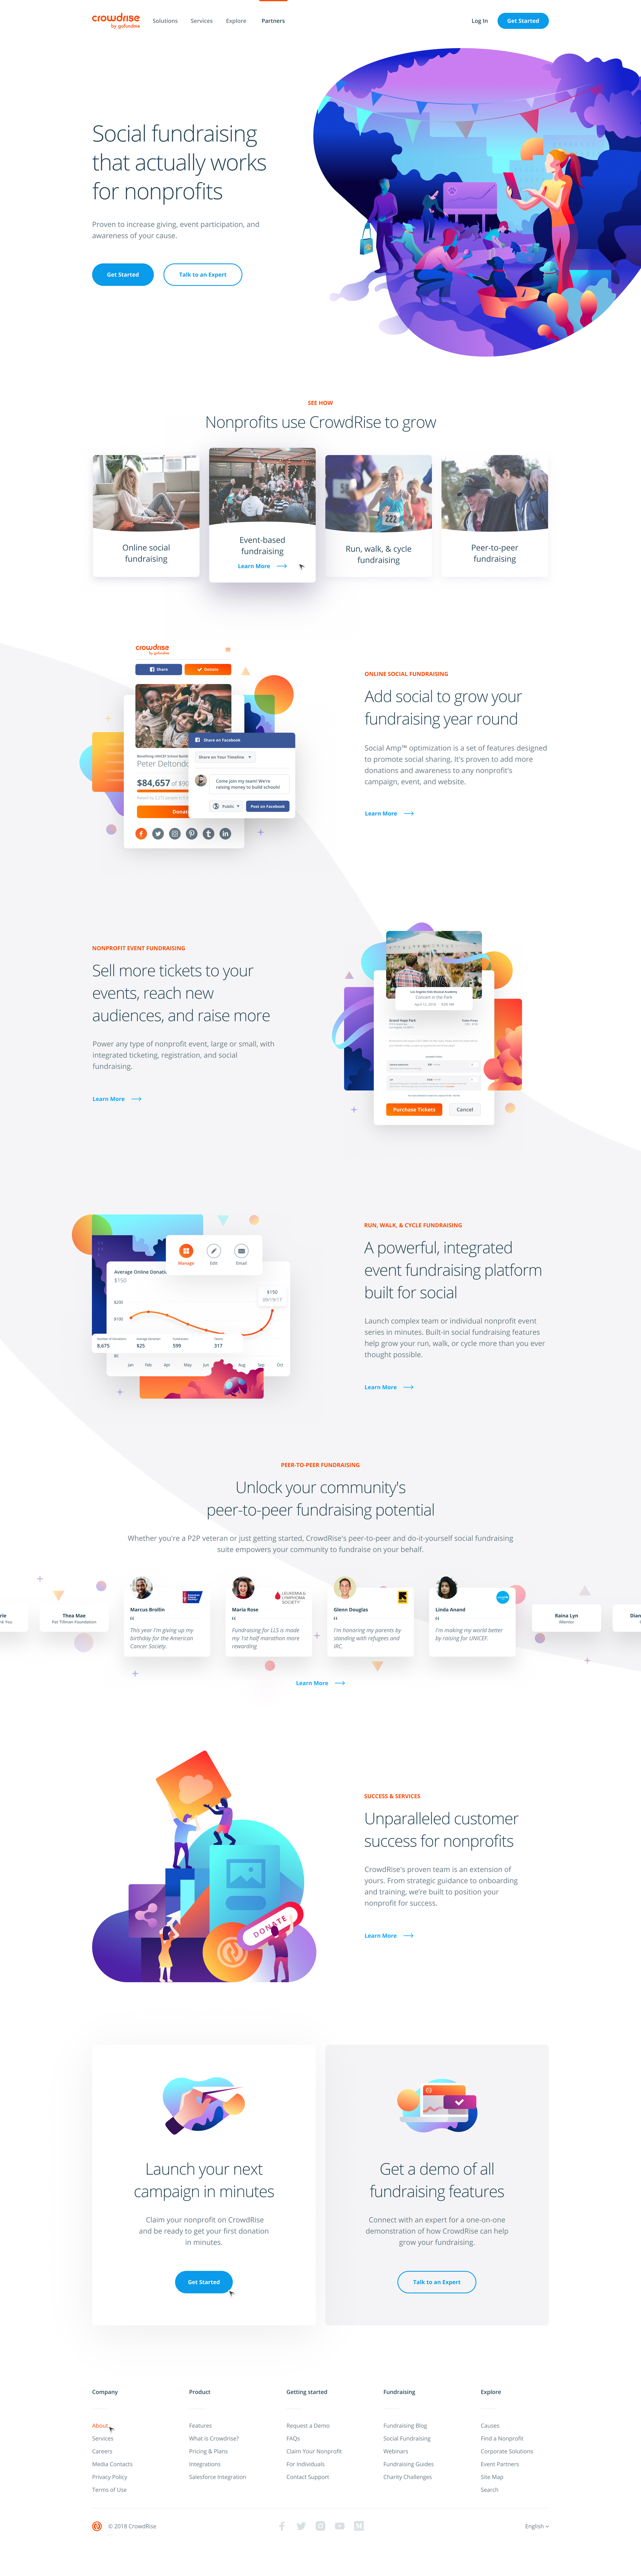 Dribbble - peter_deltondo_unfold_crowdrise_by_gofundme_homepage_attachment_2x.jpg by Peter Deltondo